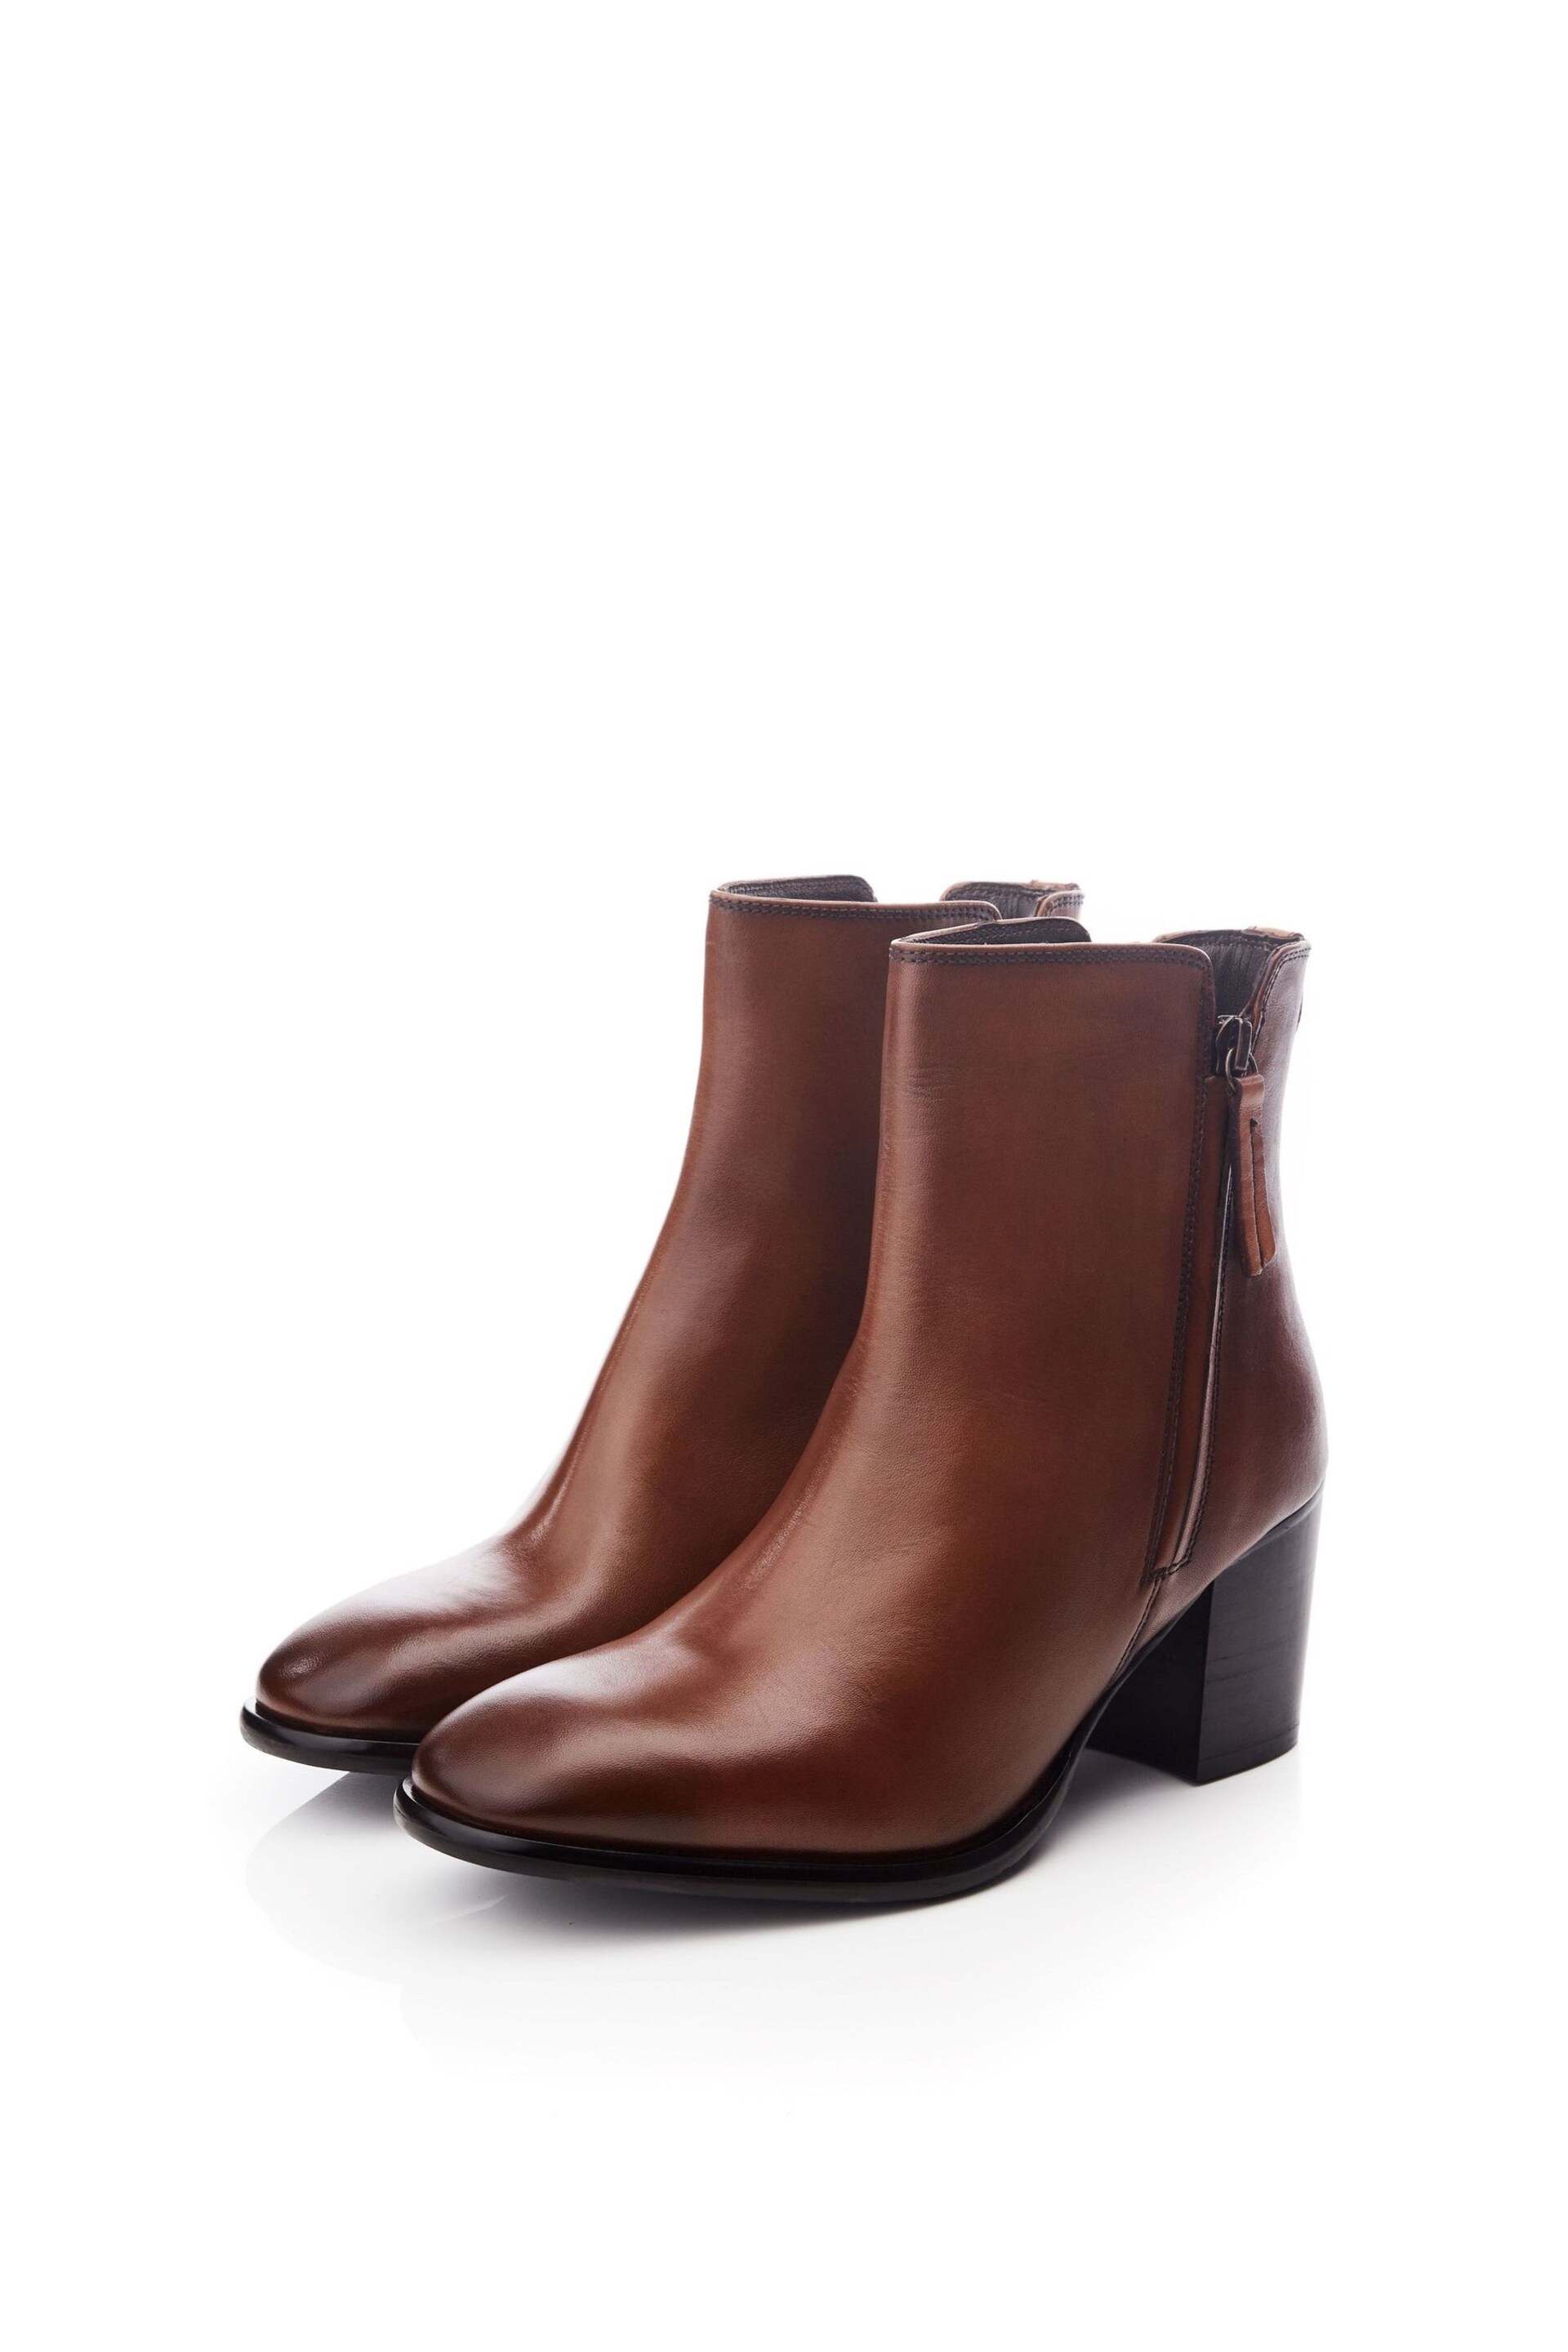 Moda in Pelle Lakayla Block Heel Ankle Brown Boots With Decorative Outside Zip - Image 2 of 4